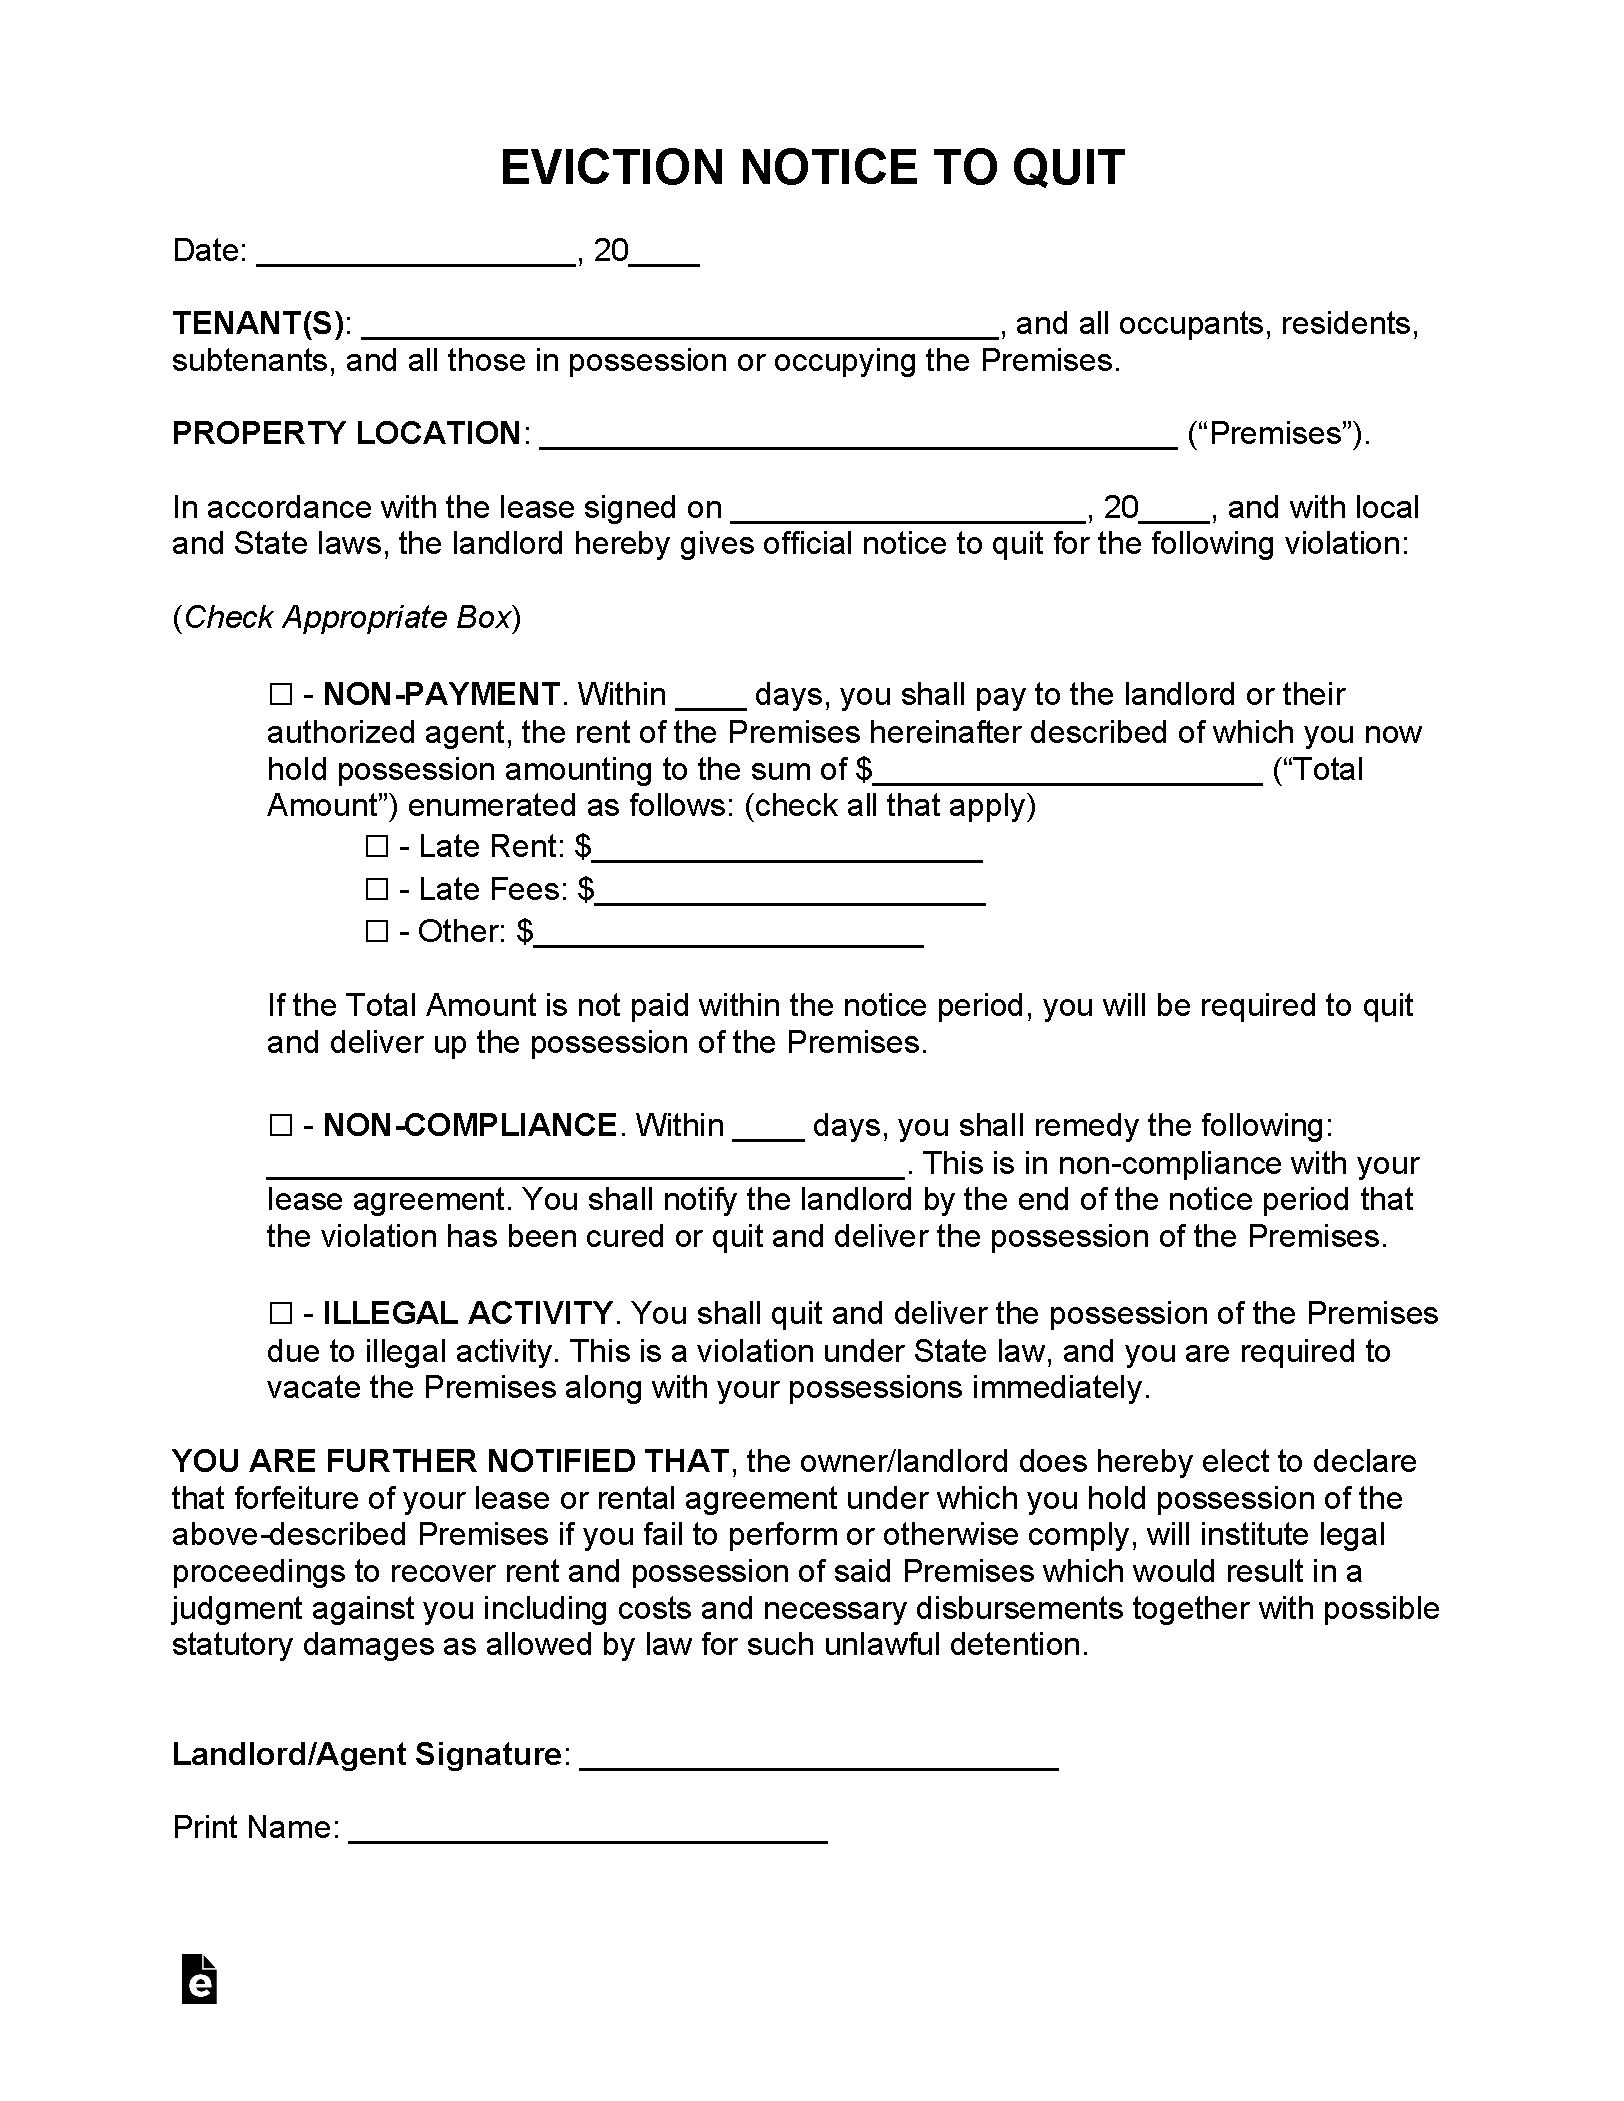 free-eviction-notice-template-notice-to-quit-pdf-word-rtf